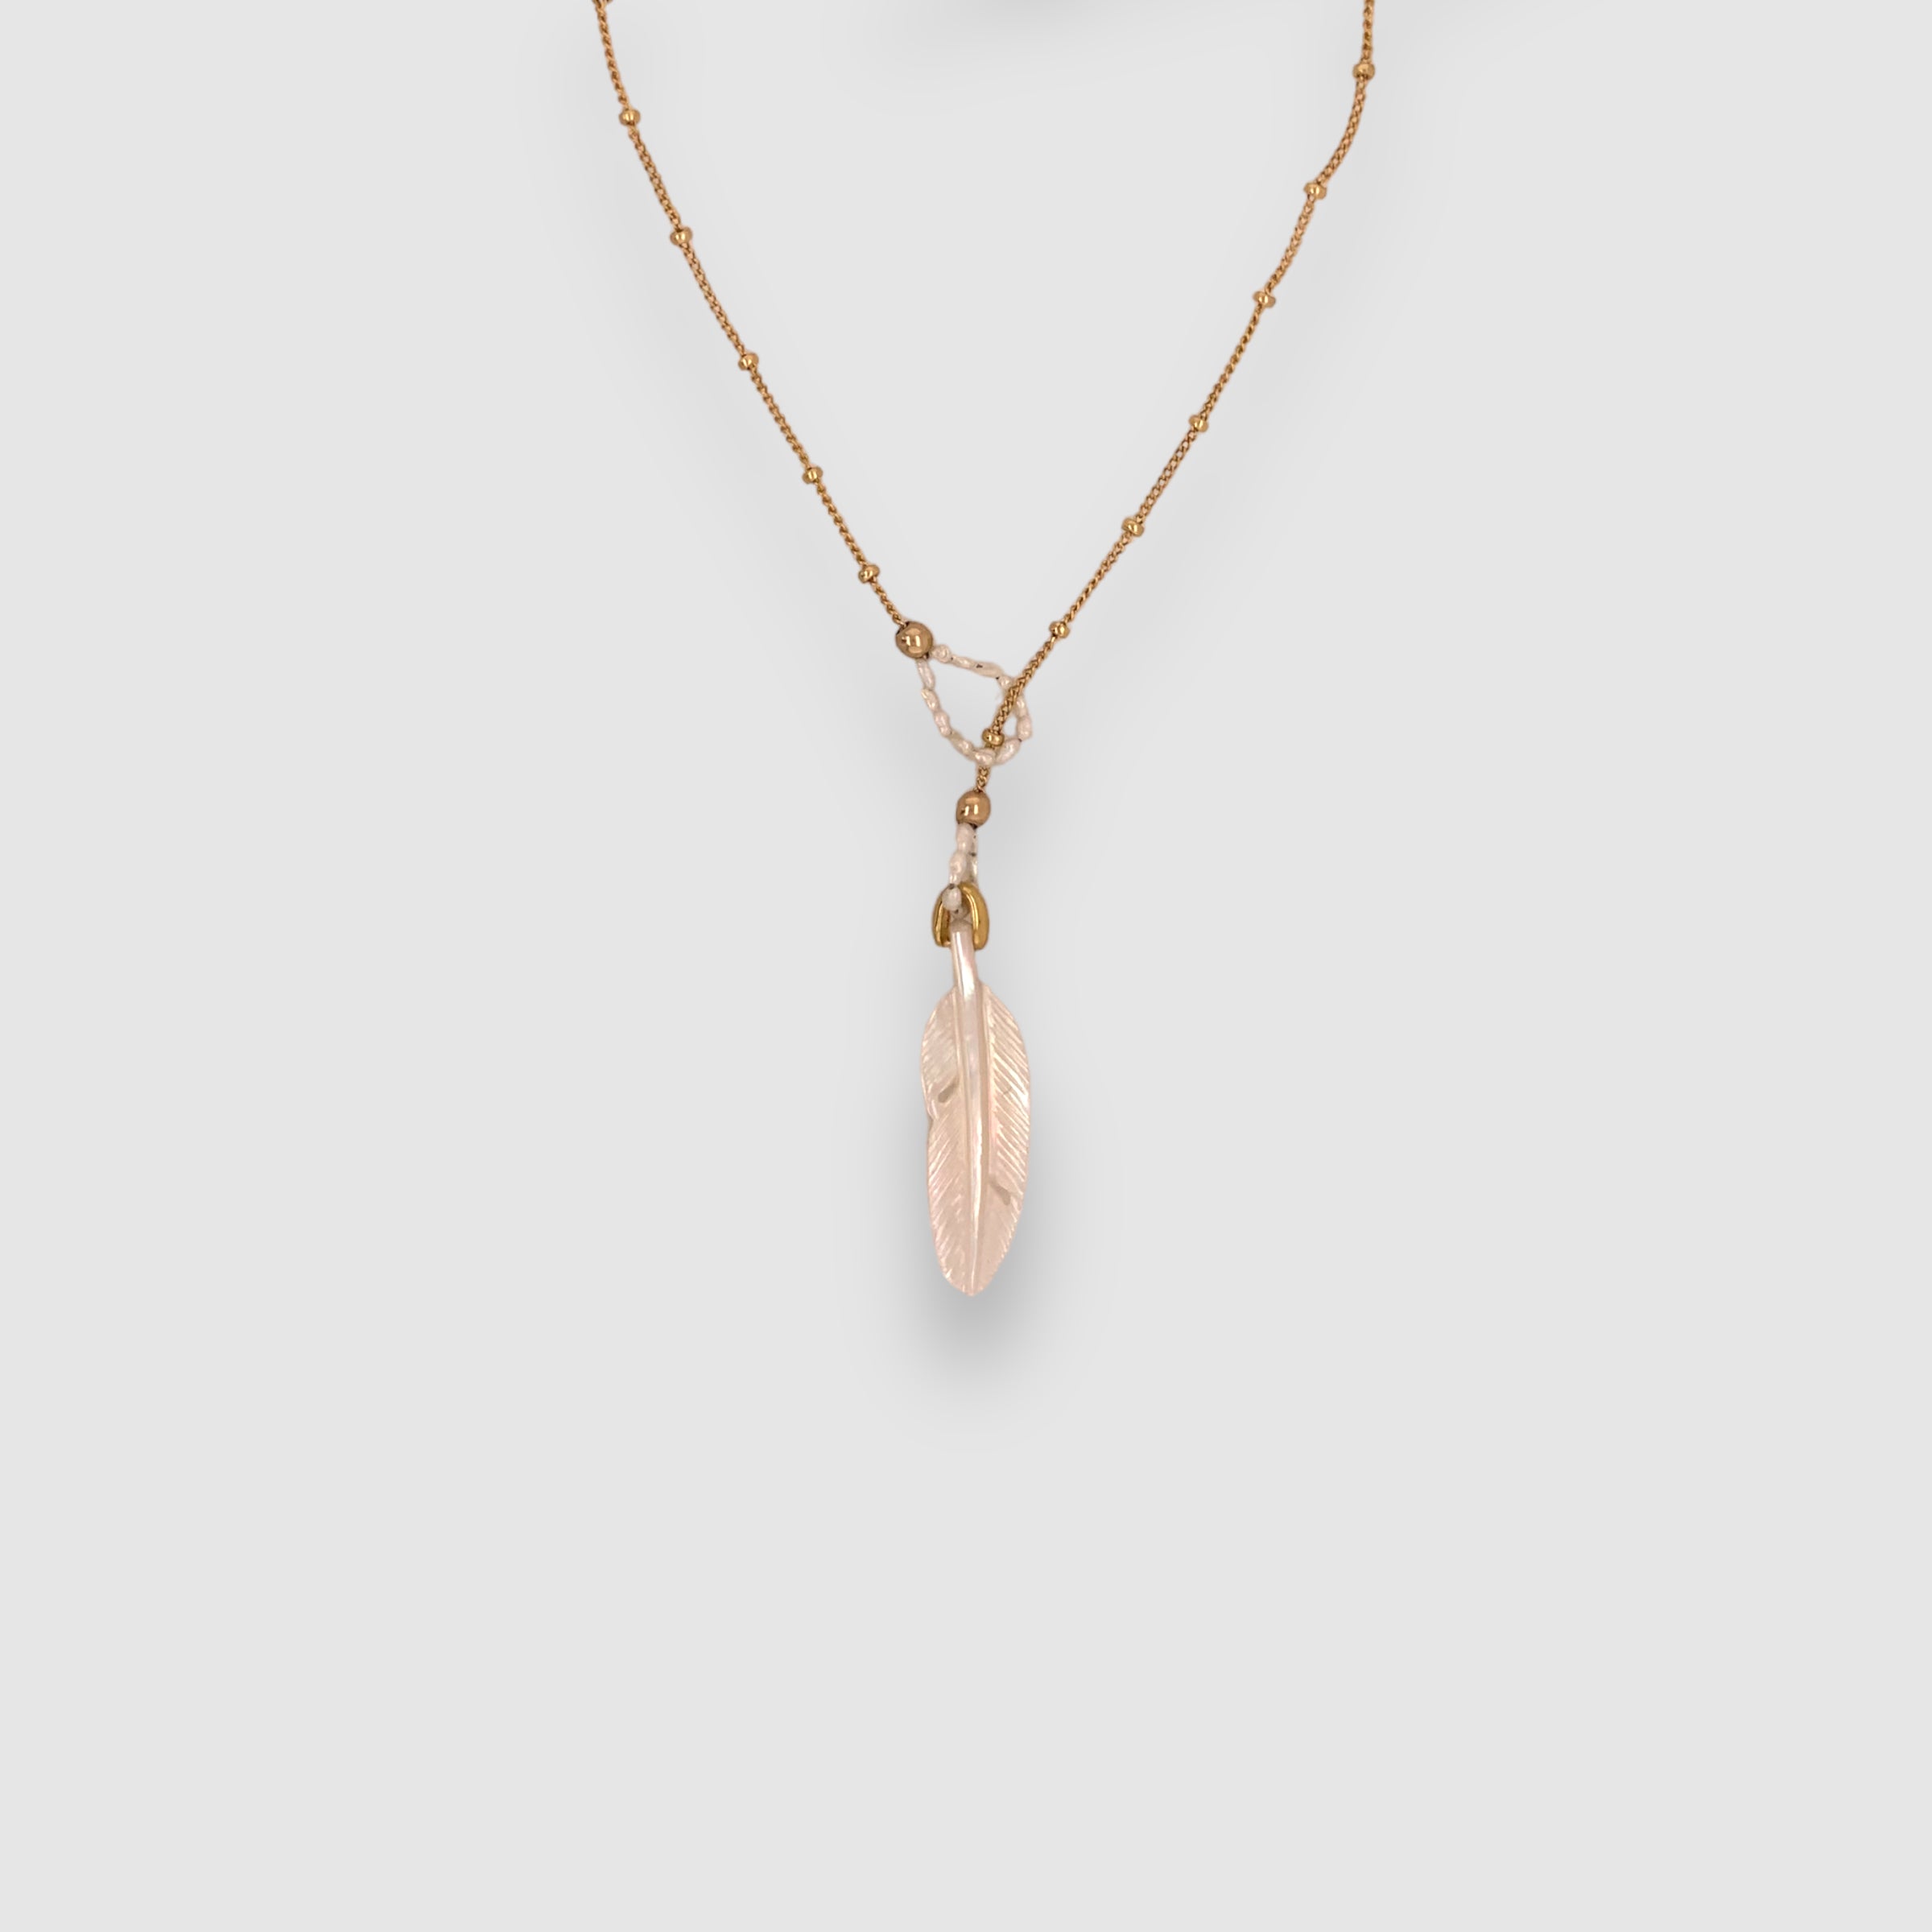 POESIA DEL MAR // NECKLACE // MOTHER OF PEARL // FEATHER